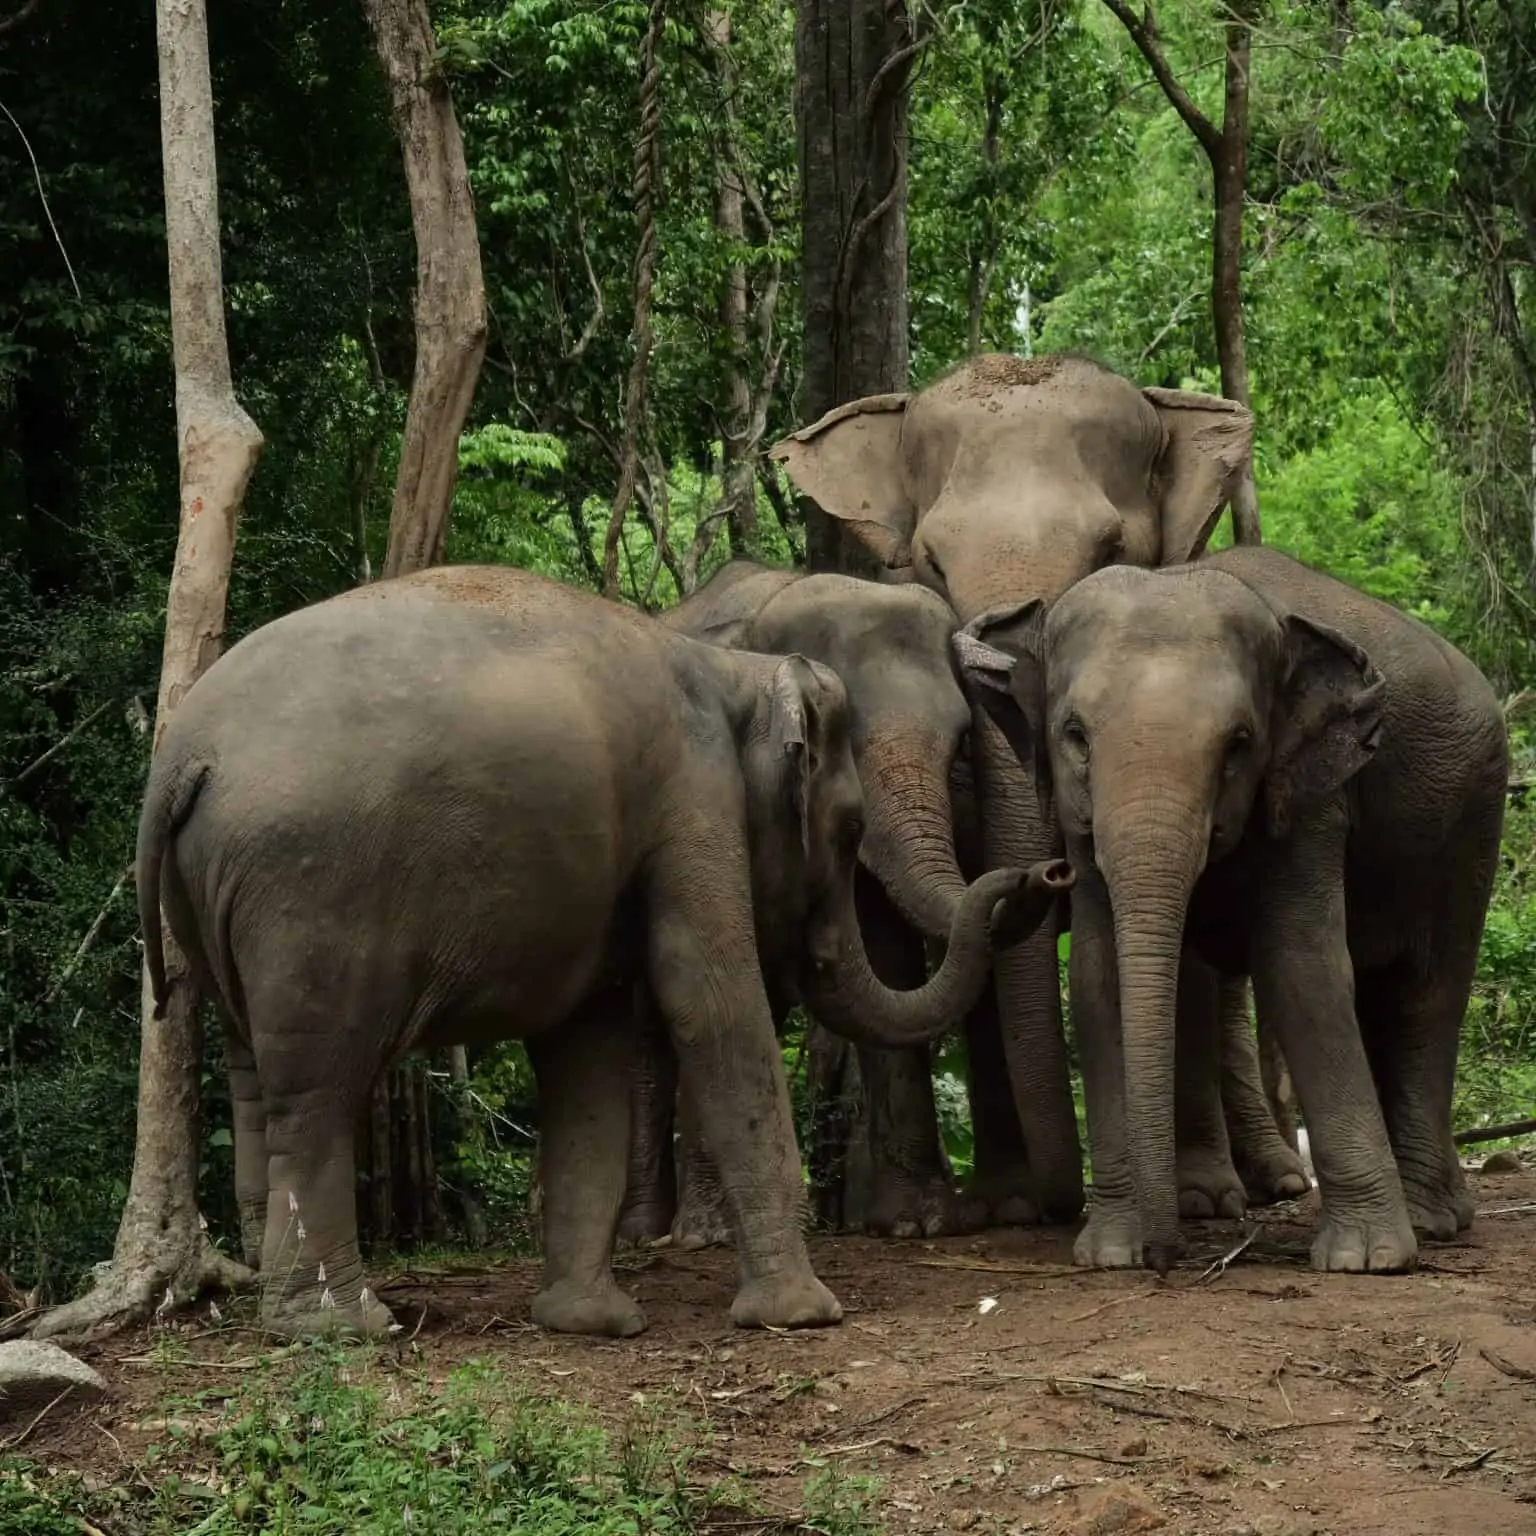 A group of elephants standing together in the woods in Koh Samui Sanctuary